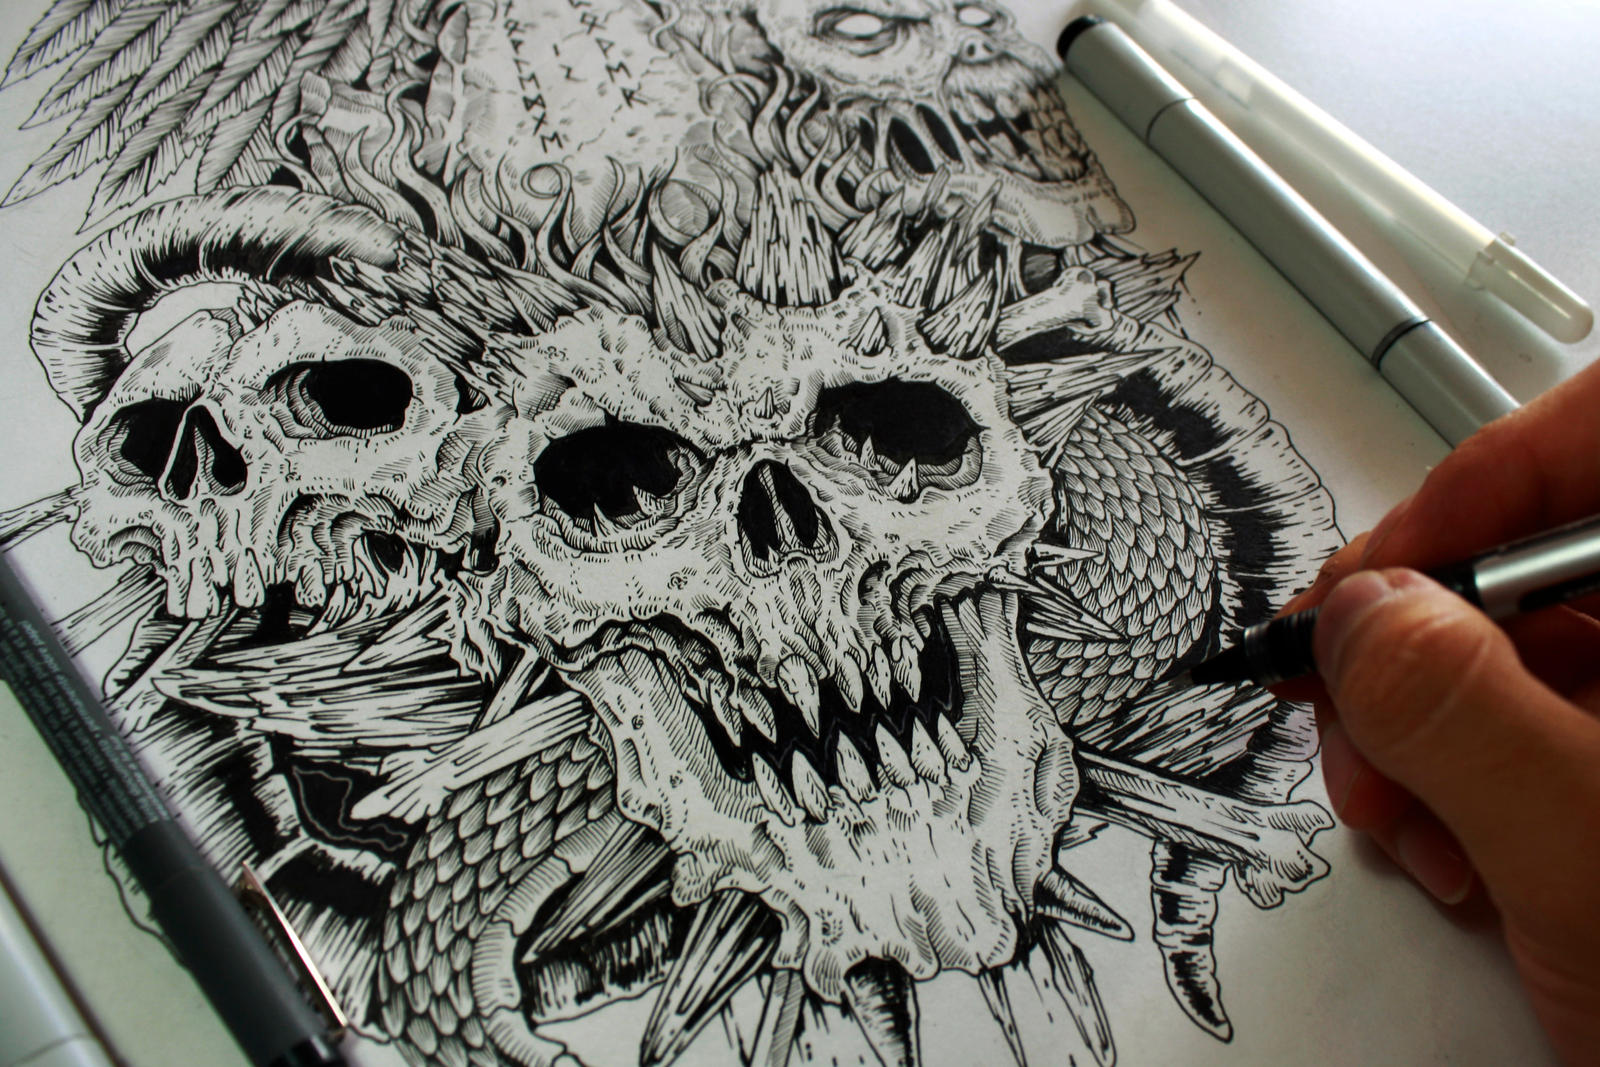 And even more skull tattoo commissions